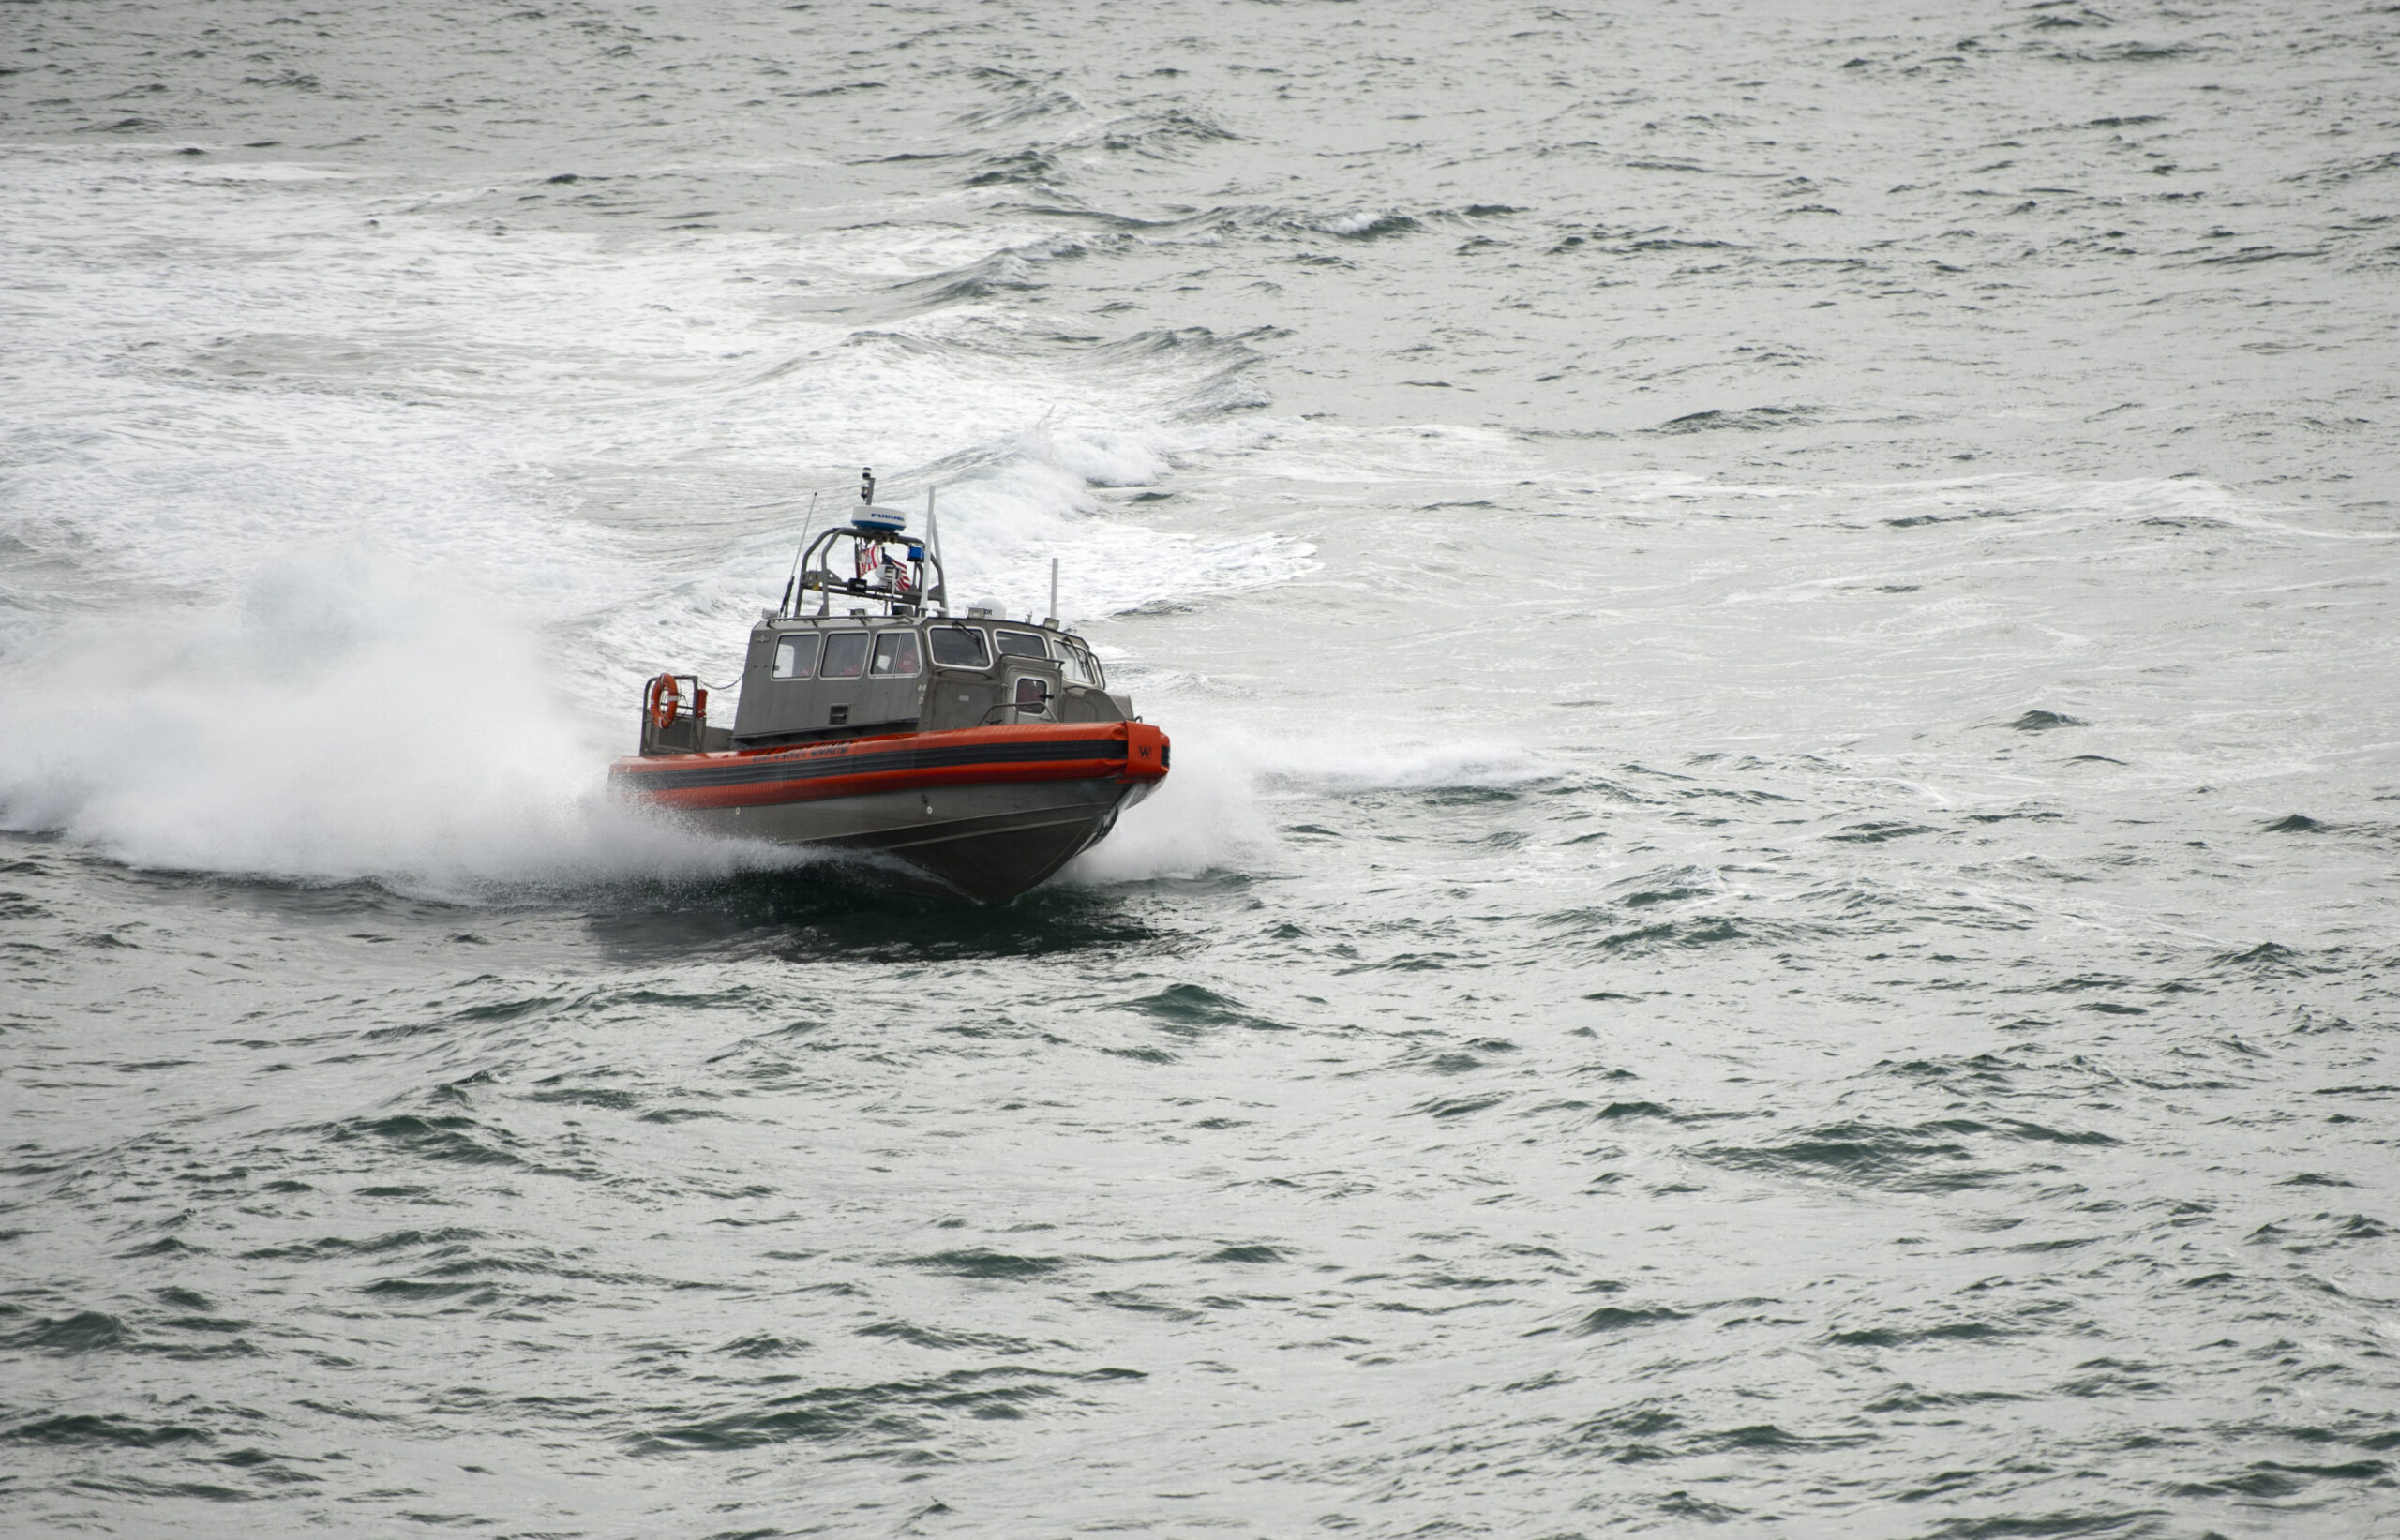 A Coast Guard small boat crew from the Coast Guard Cutter Bertholf operates a Long Range Interceptor in the Arctic Ocean, Sept. 1, 2012. The LRI has an enclosed cabin that protects the crew and enables them to stay out of the weather elements in order to stay on scene longer. The Bertholf crew is deployed in support of Operation Arctic Shield, during which the Coast Guard will test its Arctic capabilities while building partnerships with local communities to perform its maritime safety, maritime security and stewardship missions. (U.S. Coast Guard photo by Petty Officer 1st Class Timothy Tamargo)